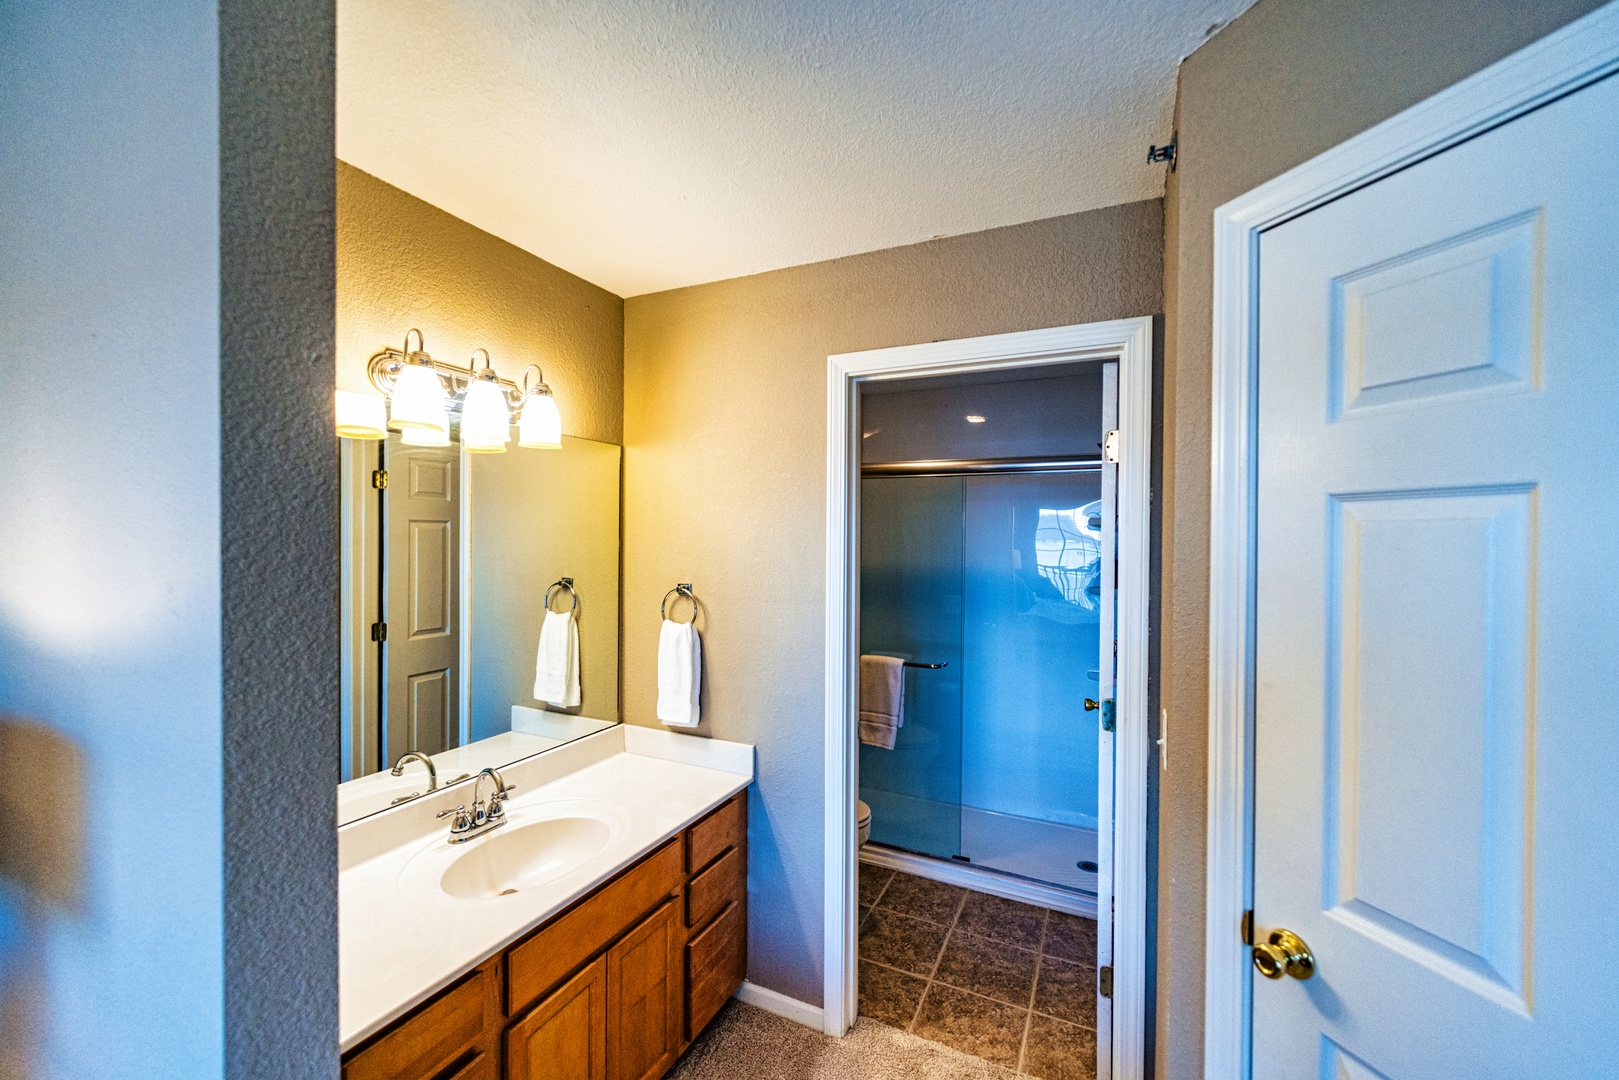 The king ensuite includes a single vanity, glass shower, & walk-in closet